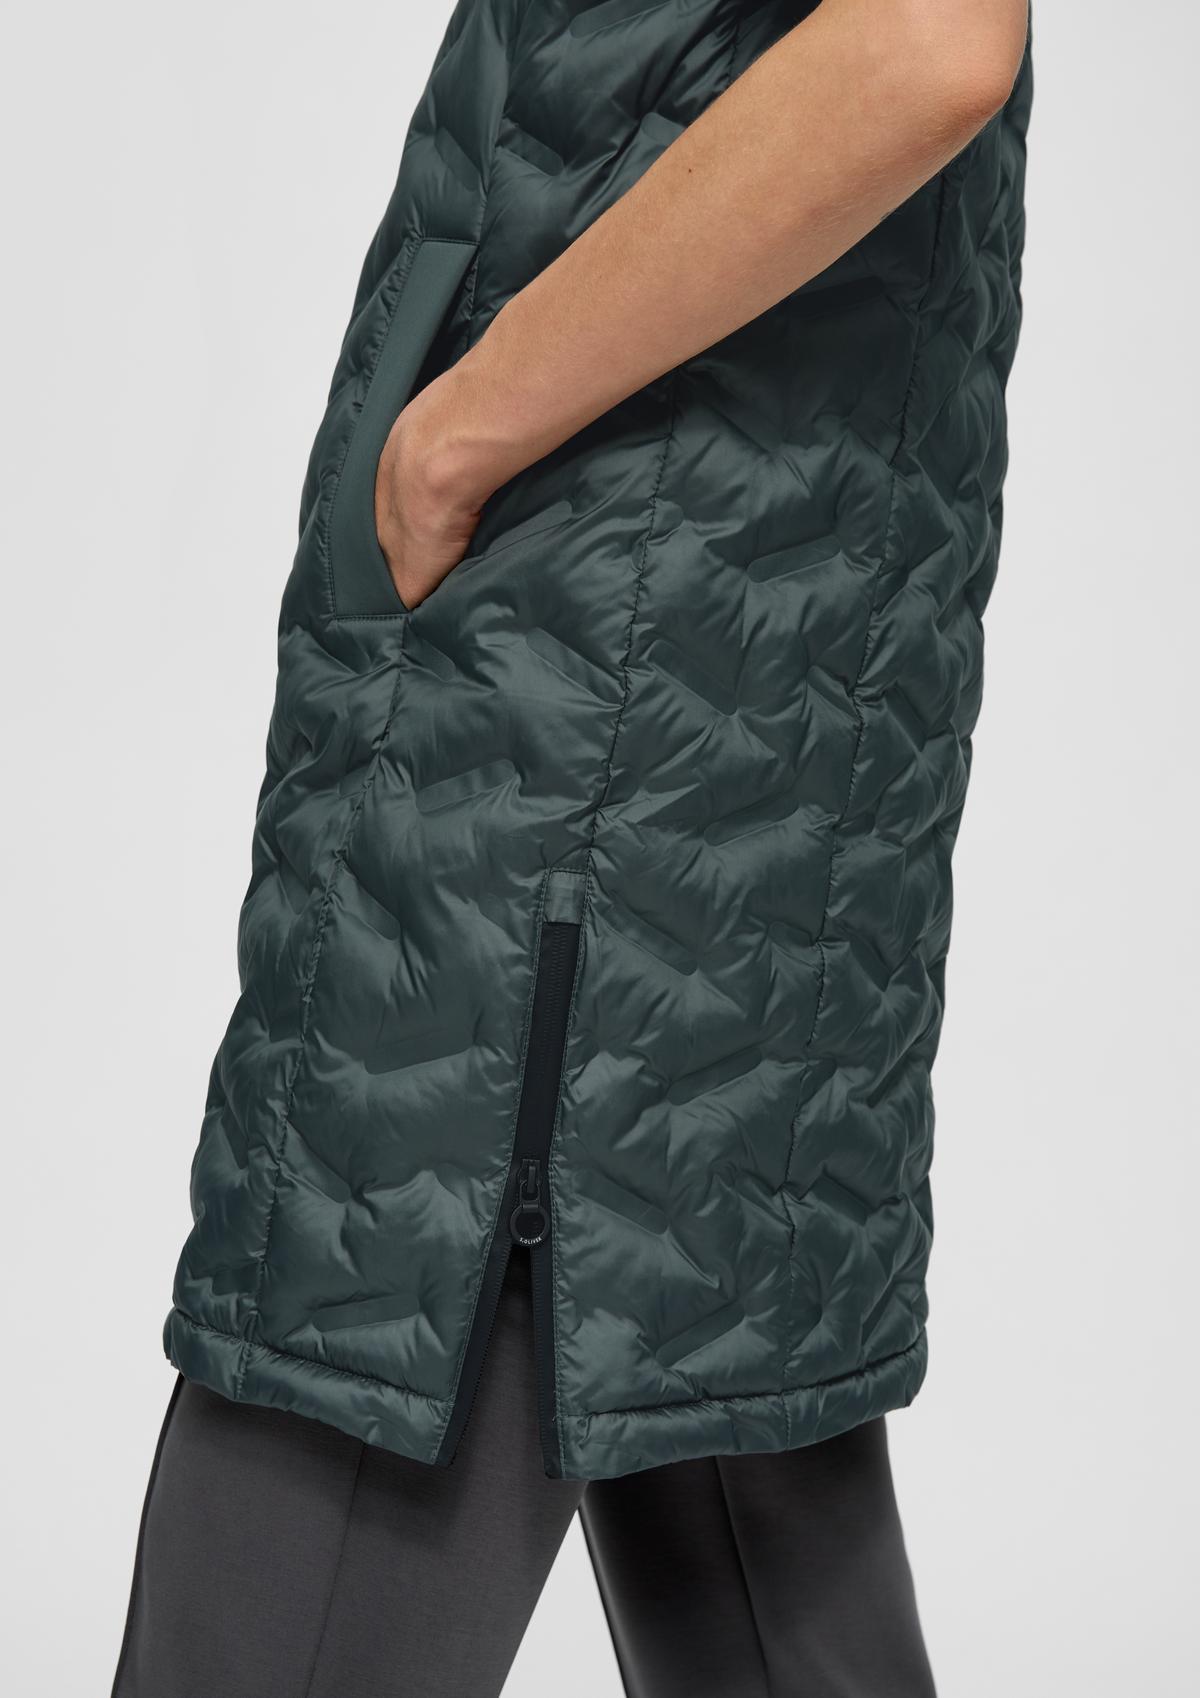 s.Oliver Long body warmer with quilting